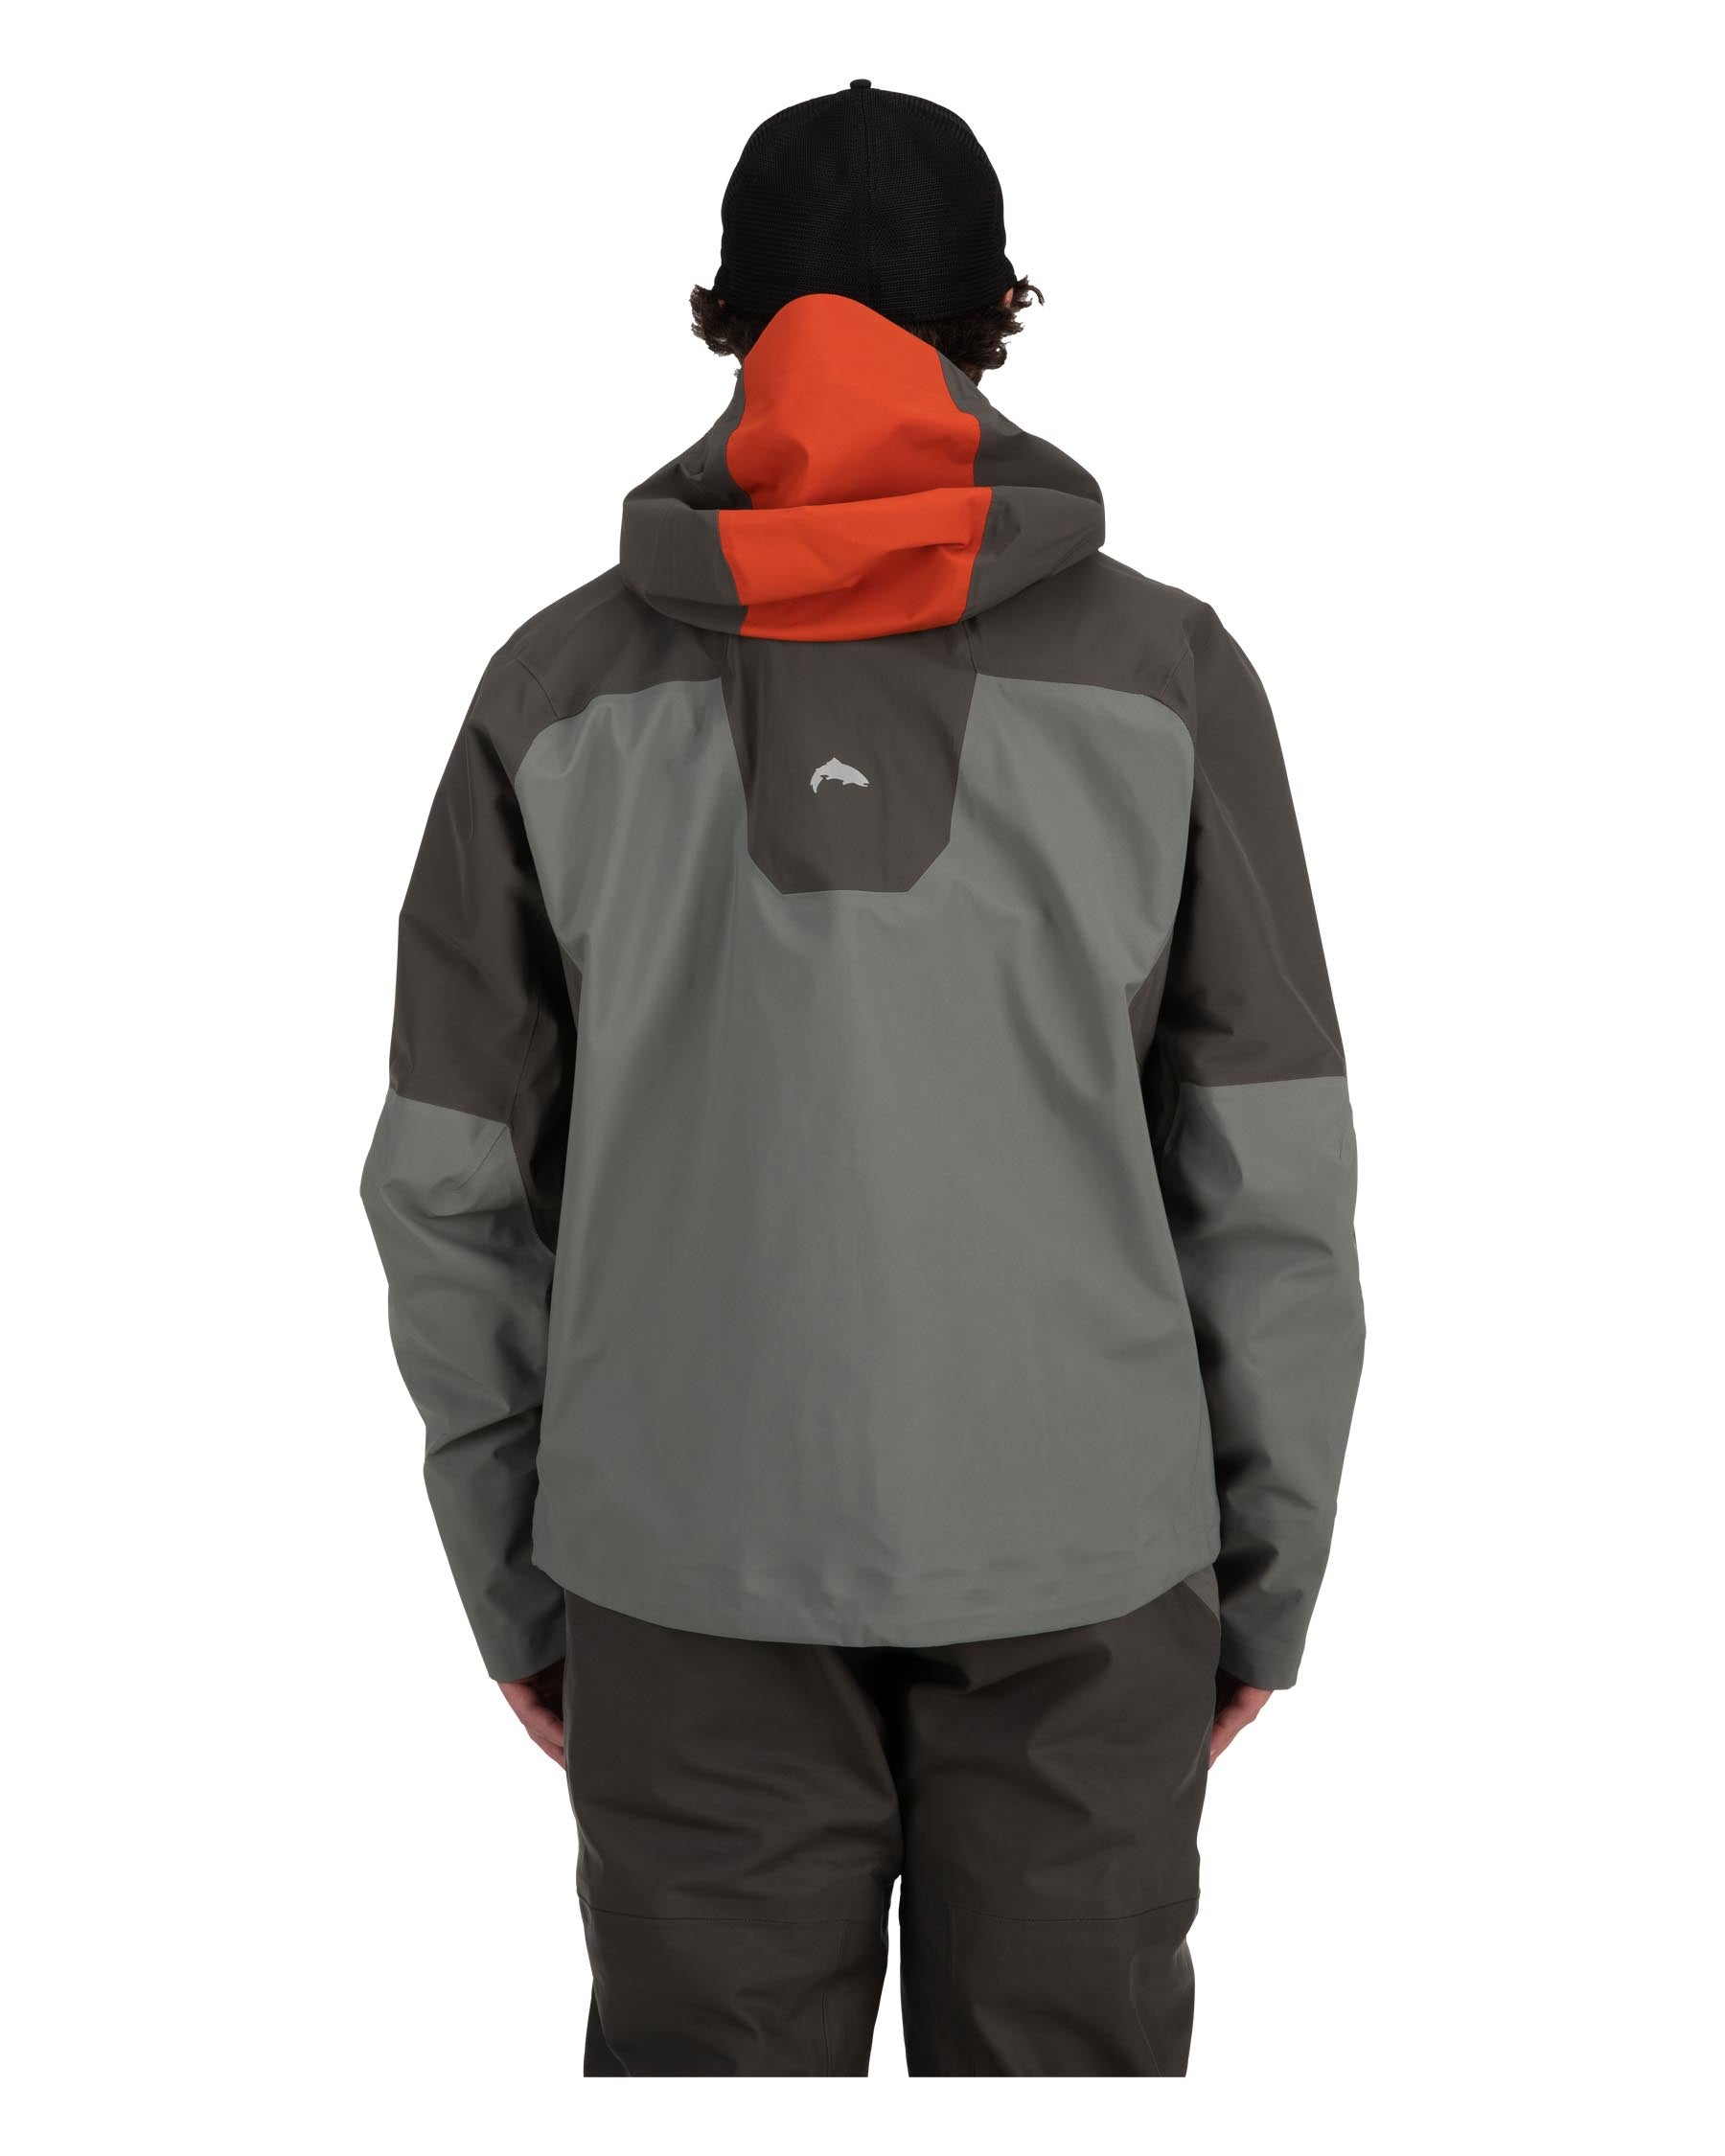 SIMMS M's G3 Guide Wading Jacket